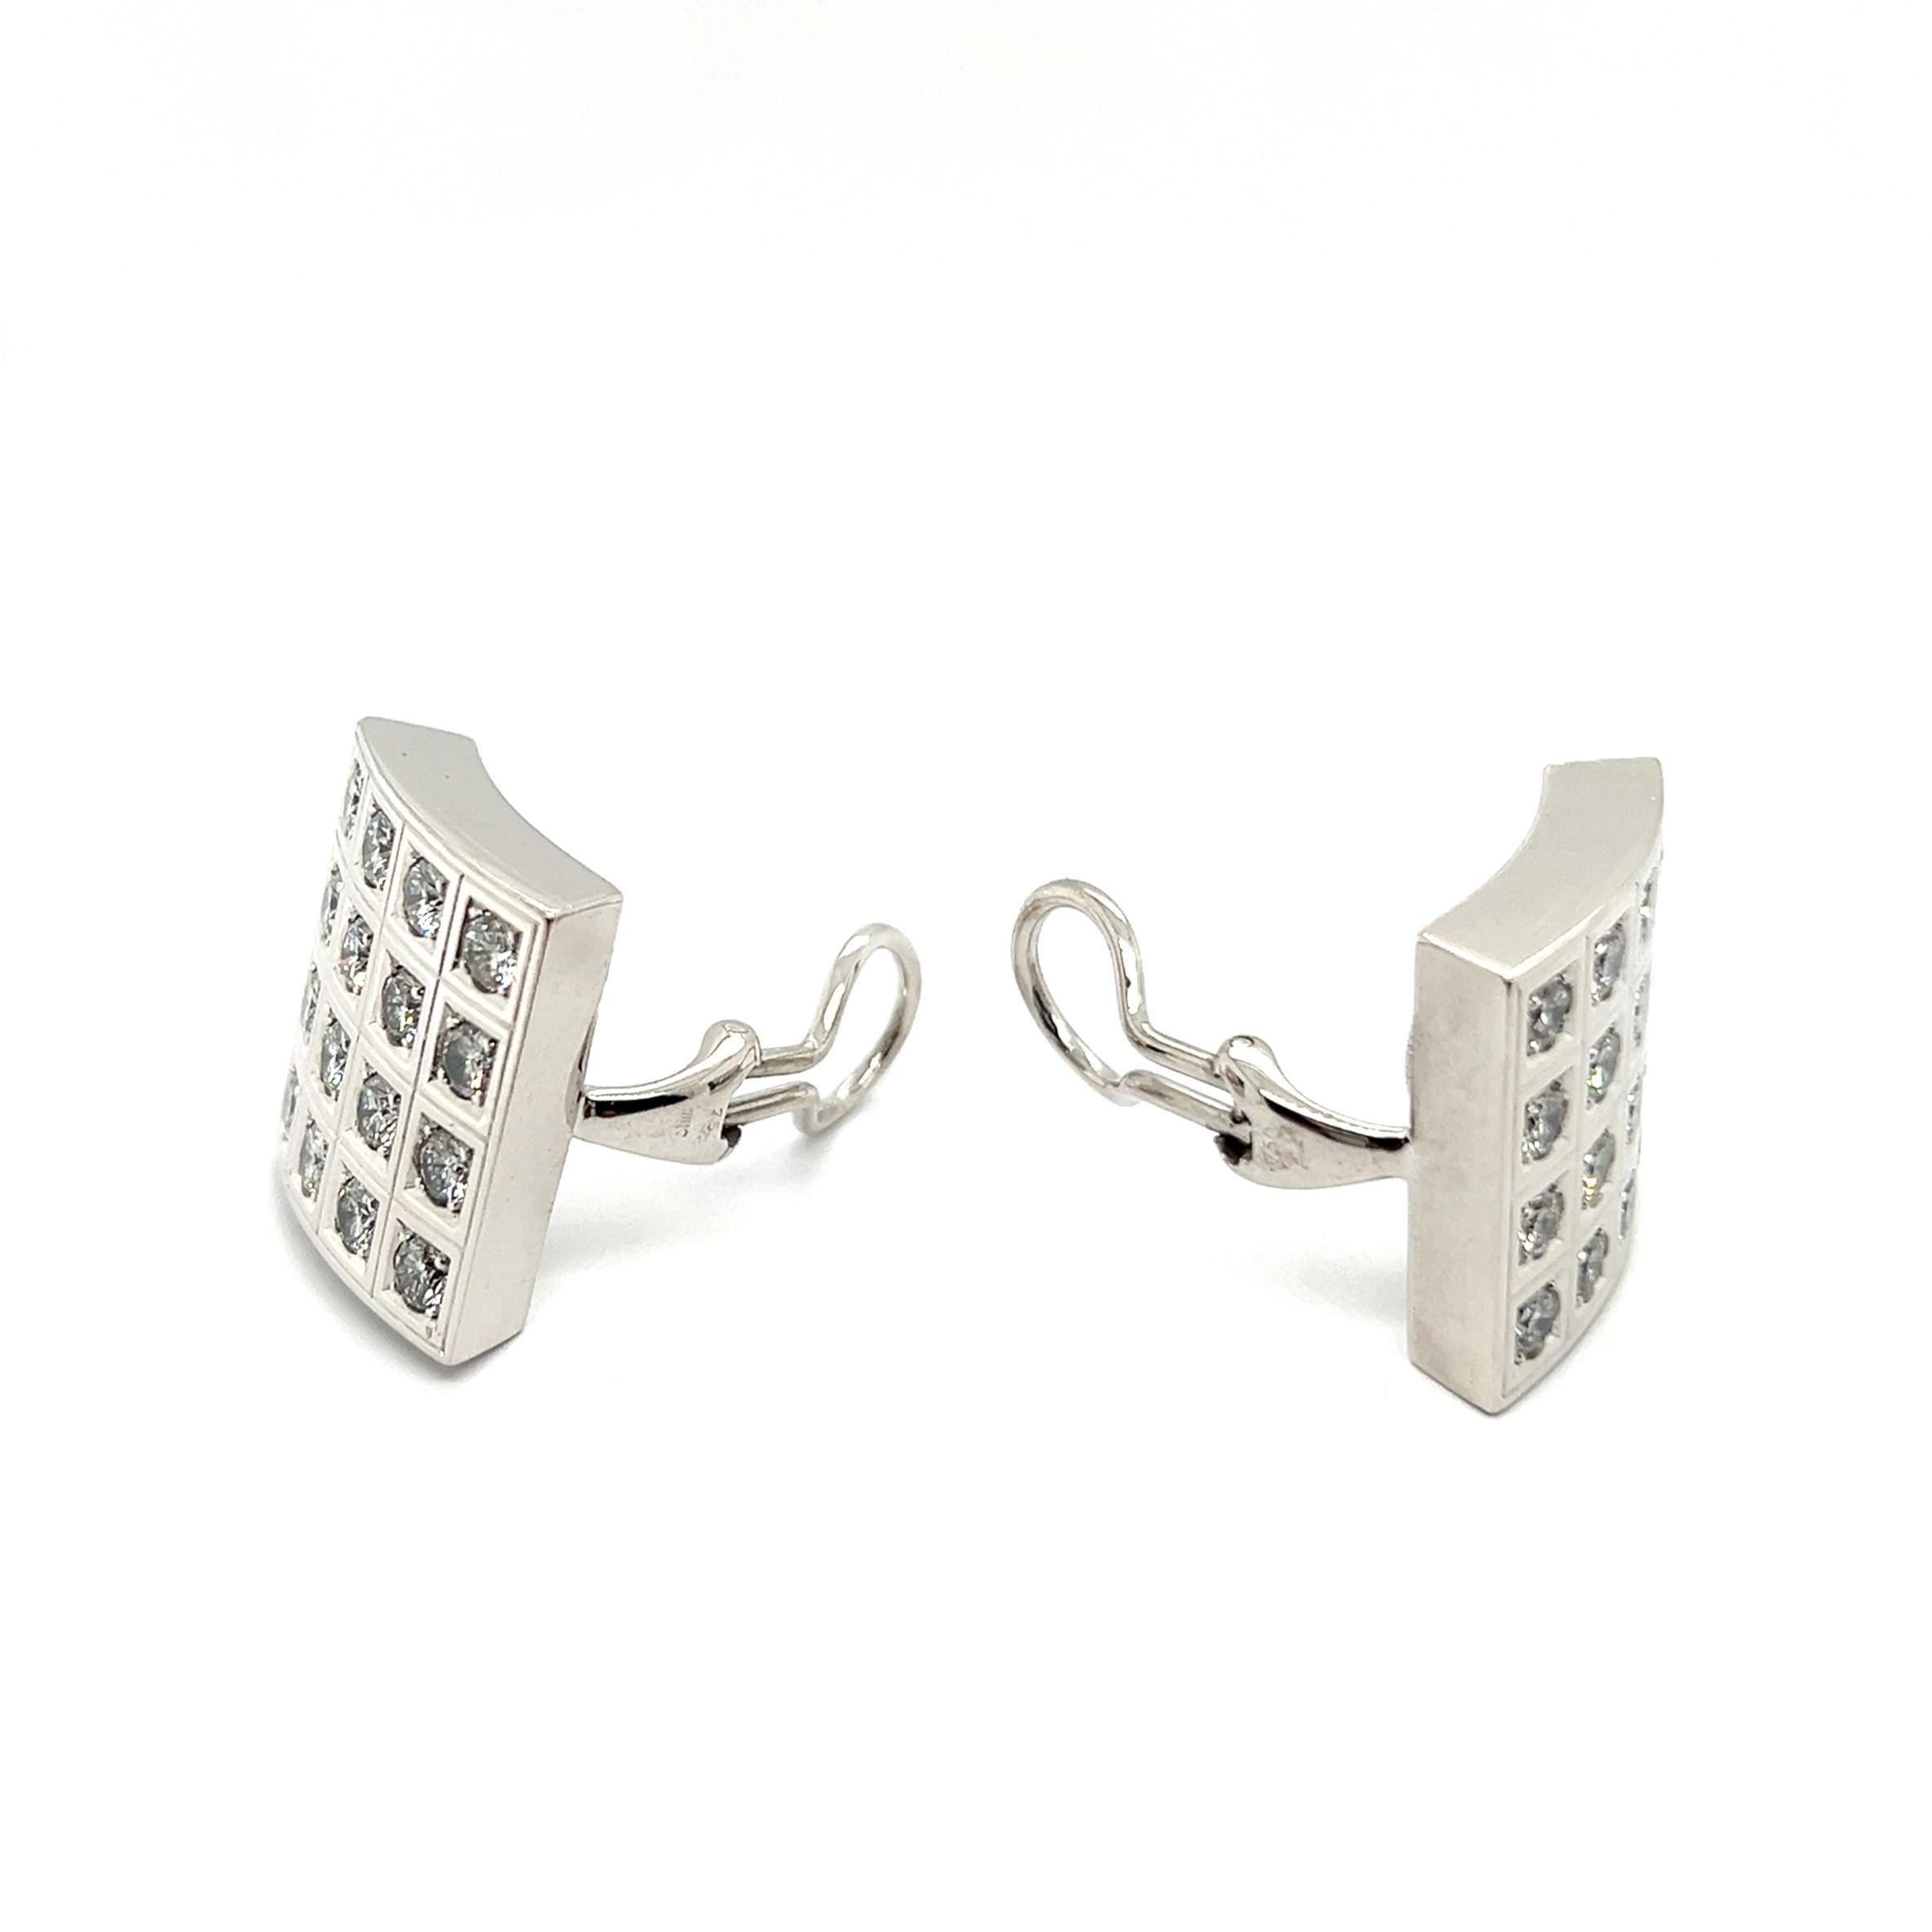  Bold Graphic Earrings with Diamonds in 18 Karat White Gold by Majo Fruithof 3